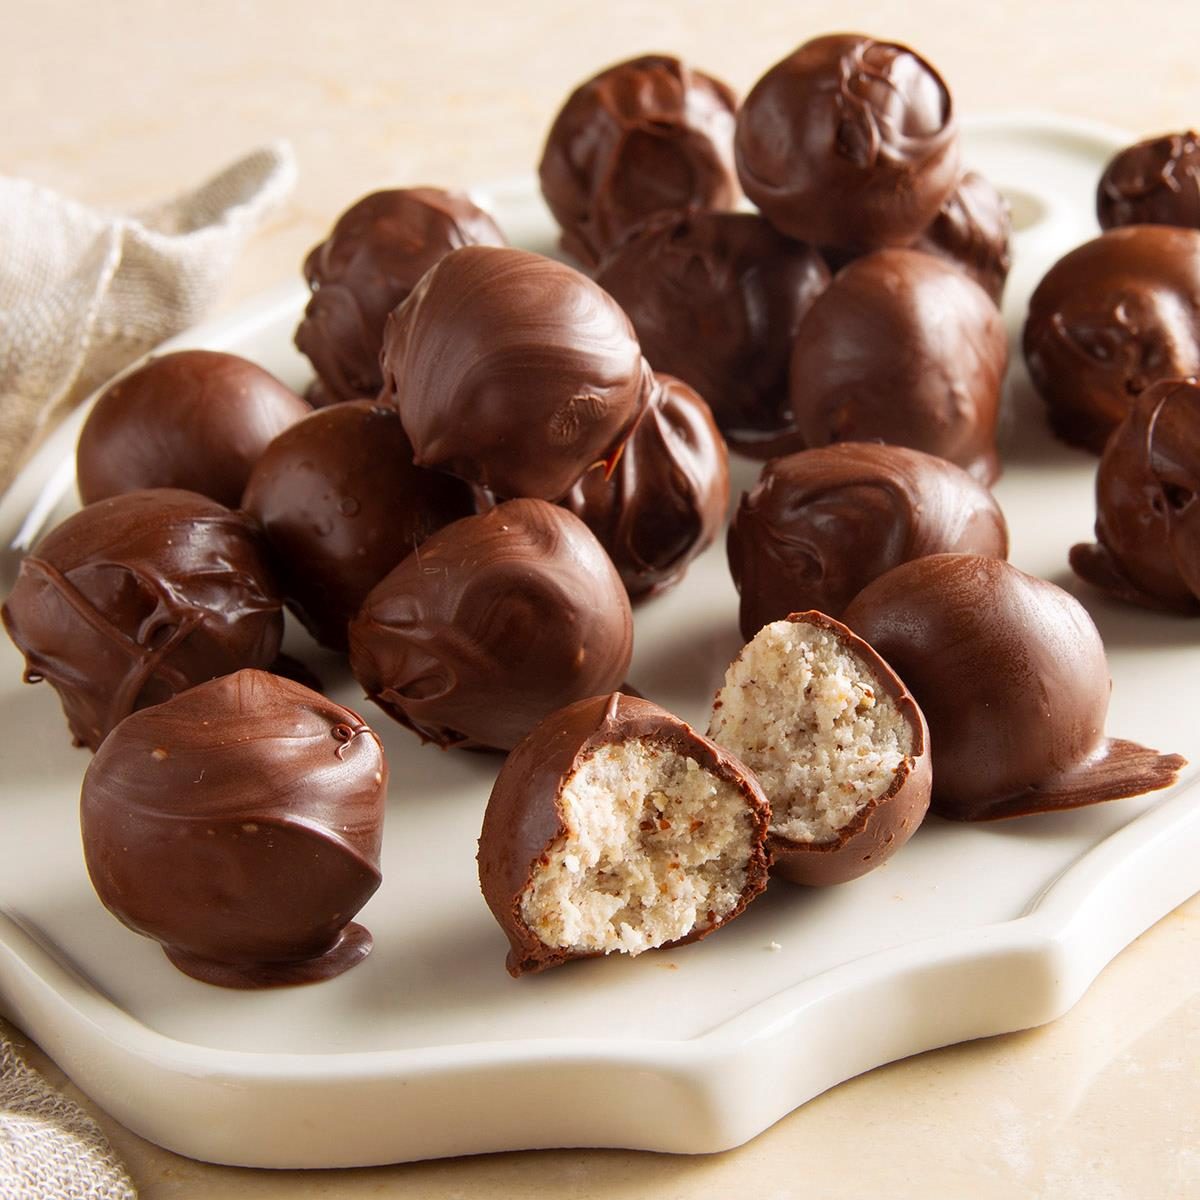 Chocolate Bonbons Recipe: How to Make It